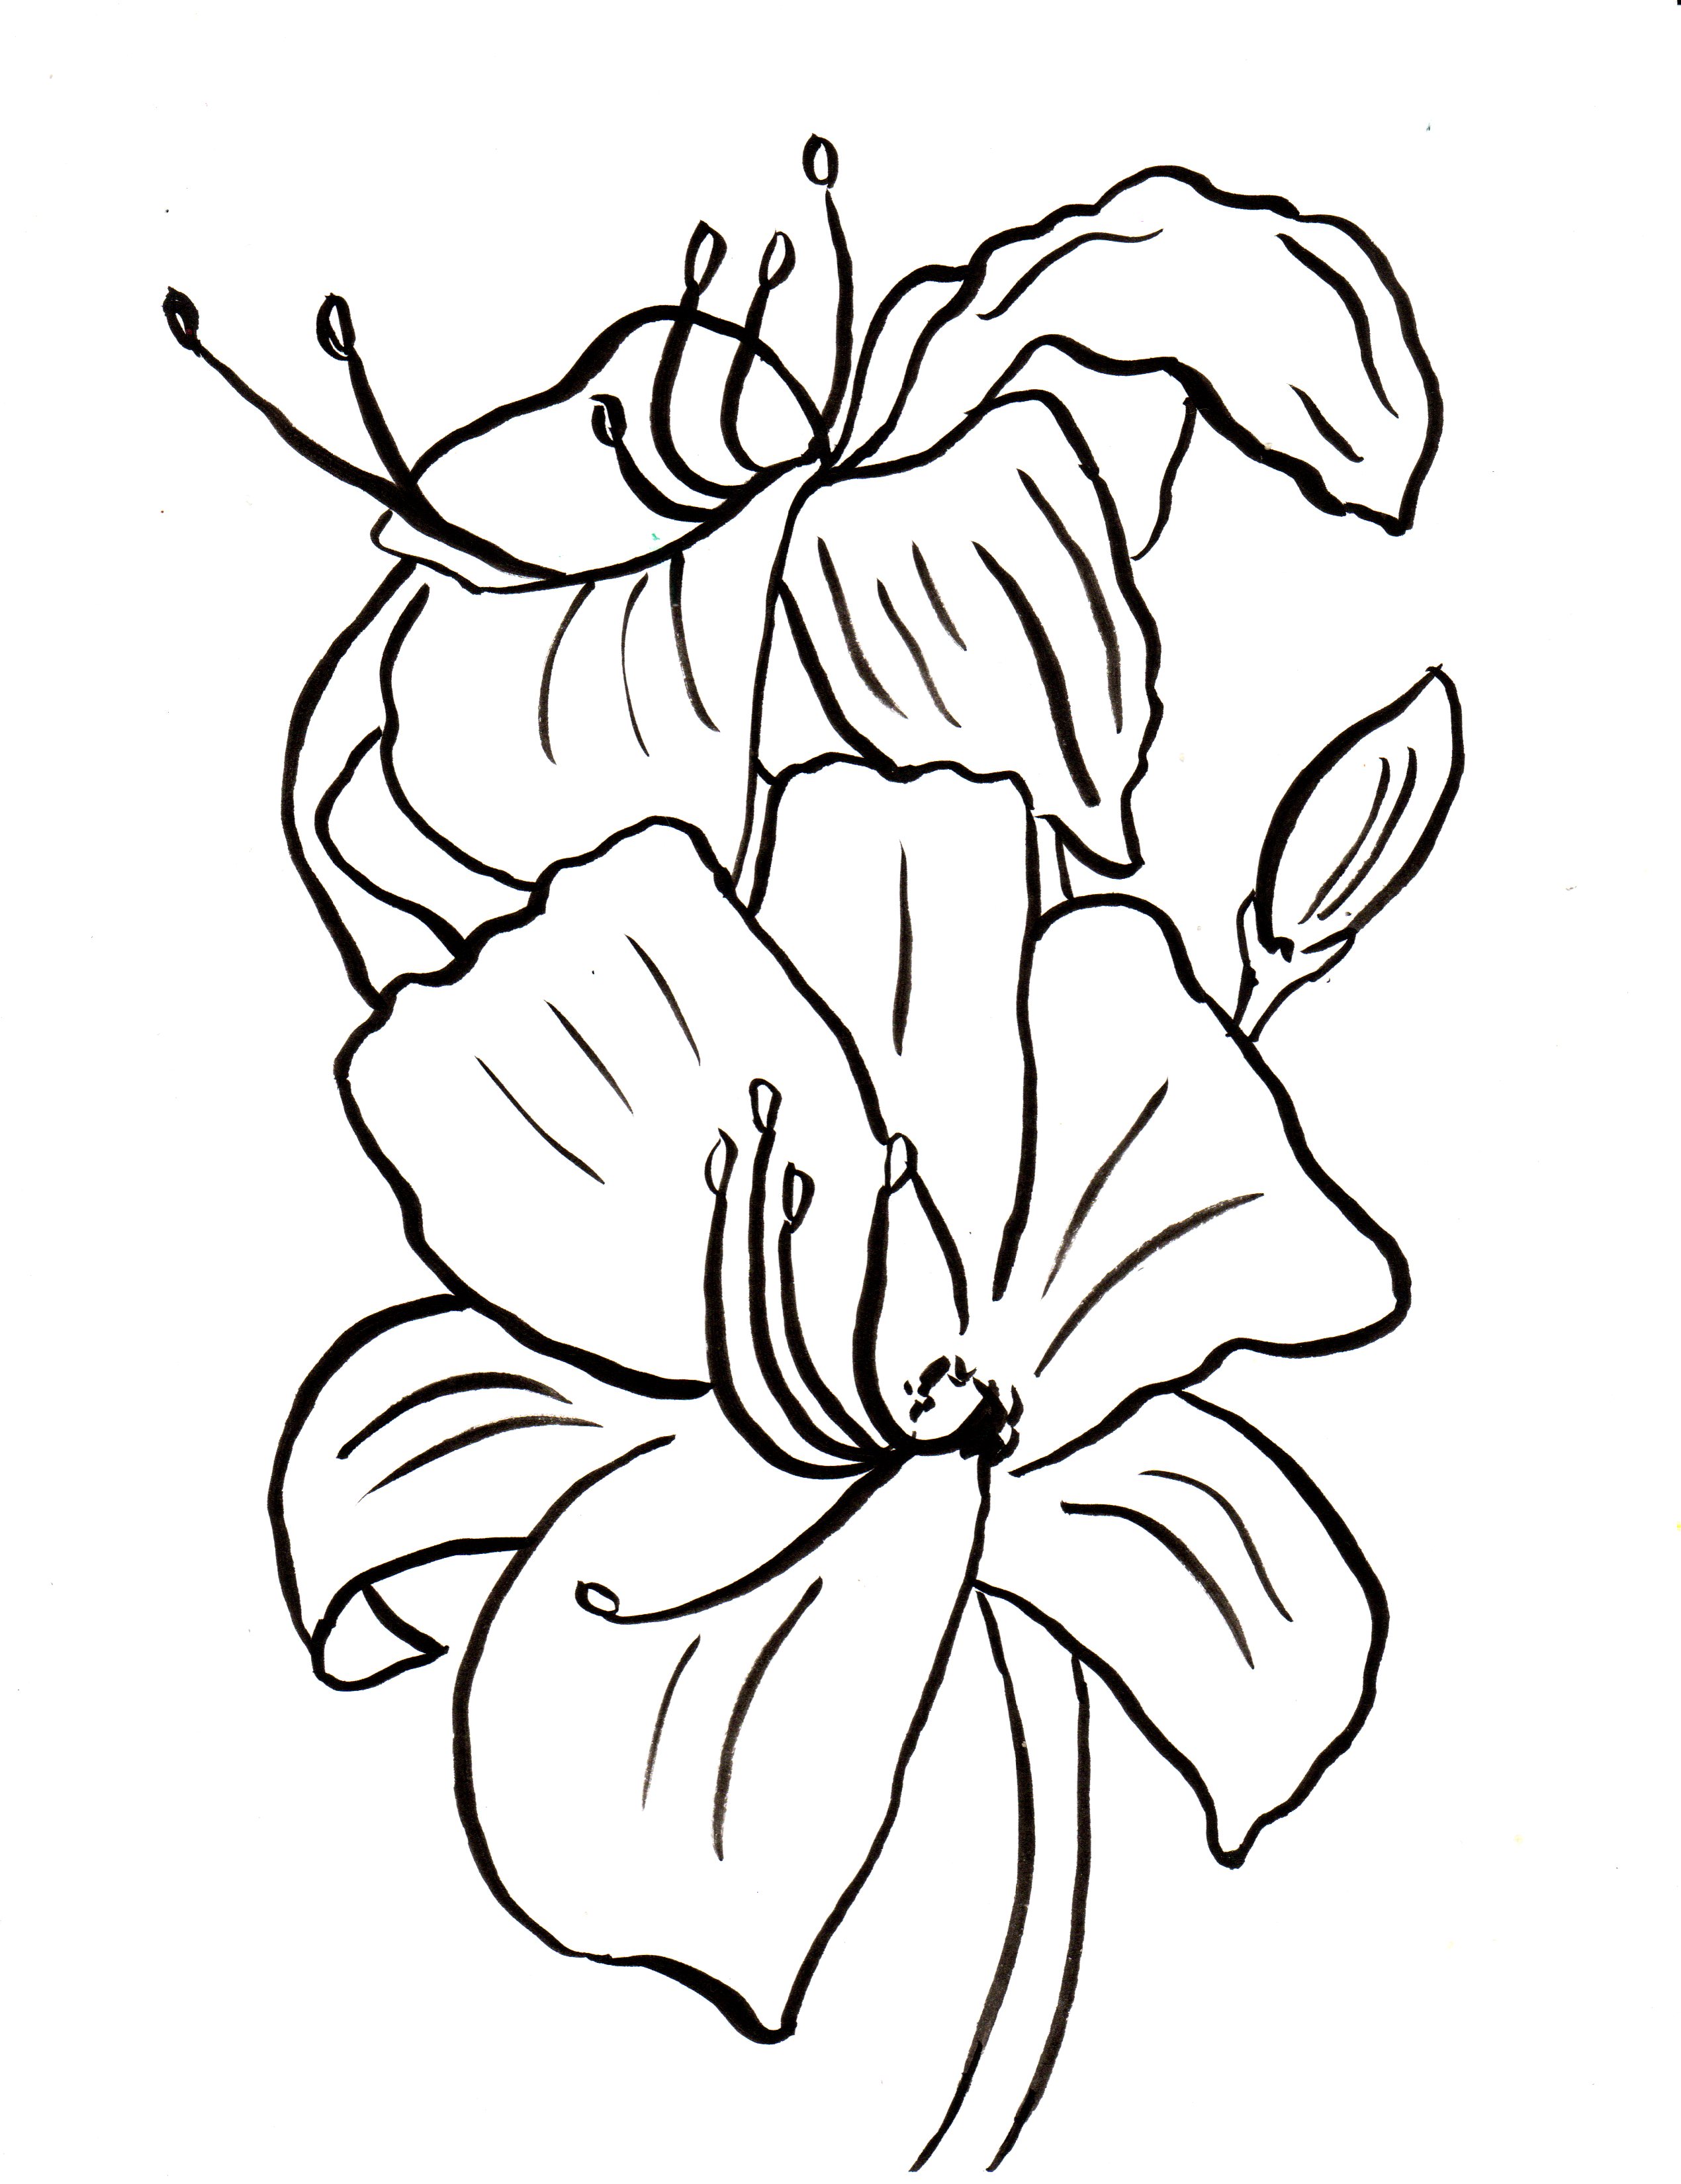 Cute Lily Flower Coloring Pages for Kindergarten